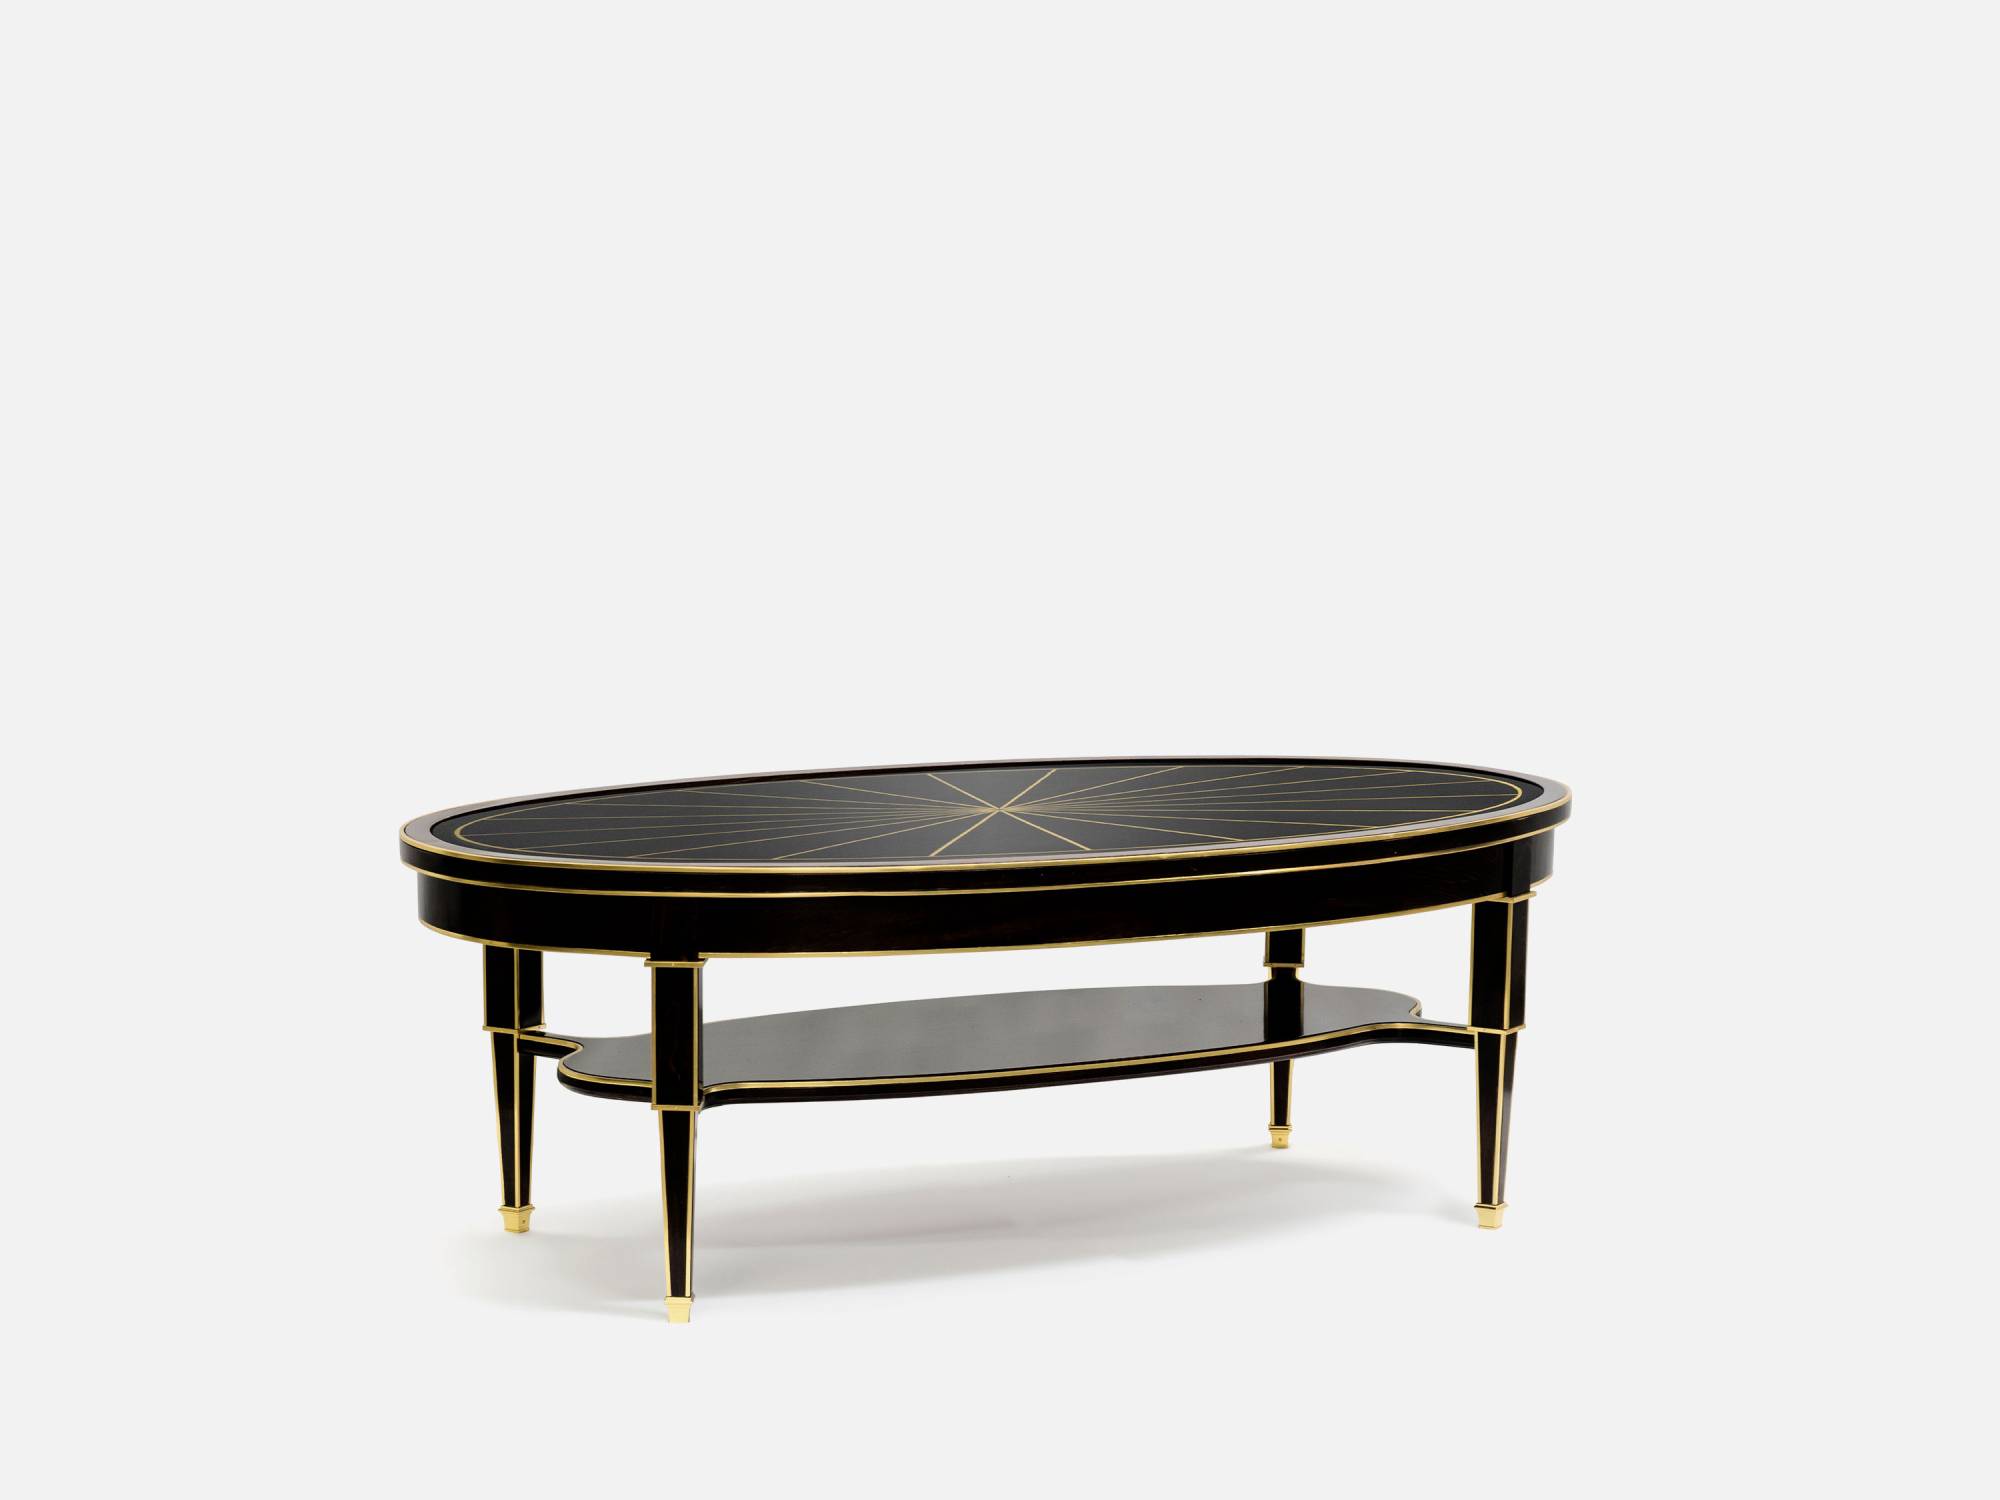 ART. 2219 – The elegance of luxury classic Small tables made in Italy by C.G. Capelletti.